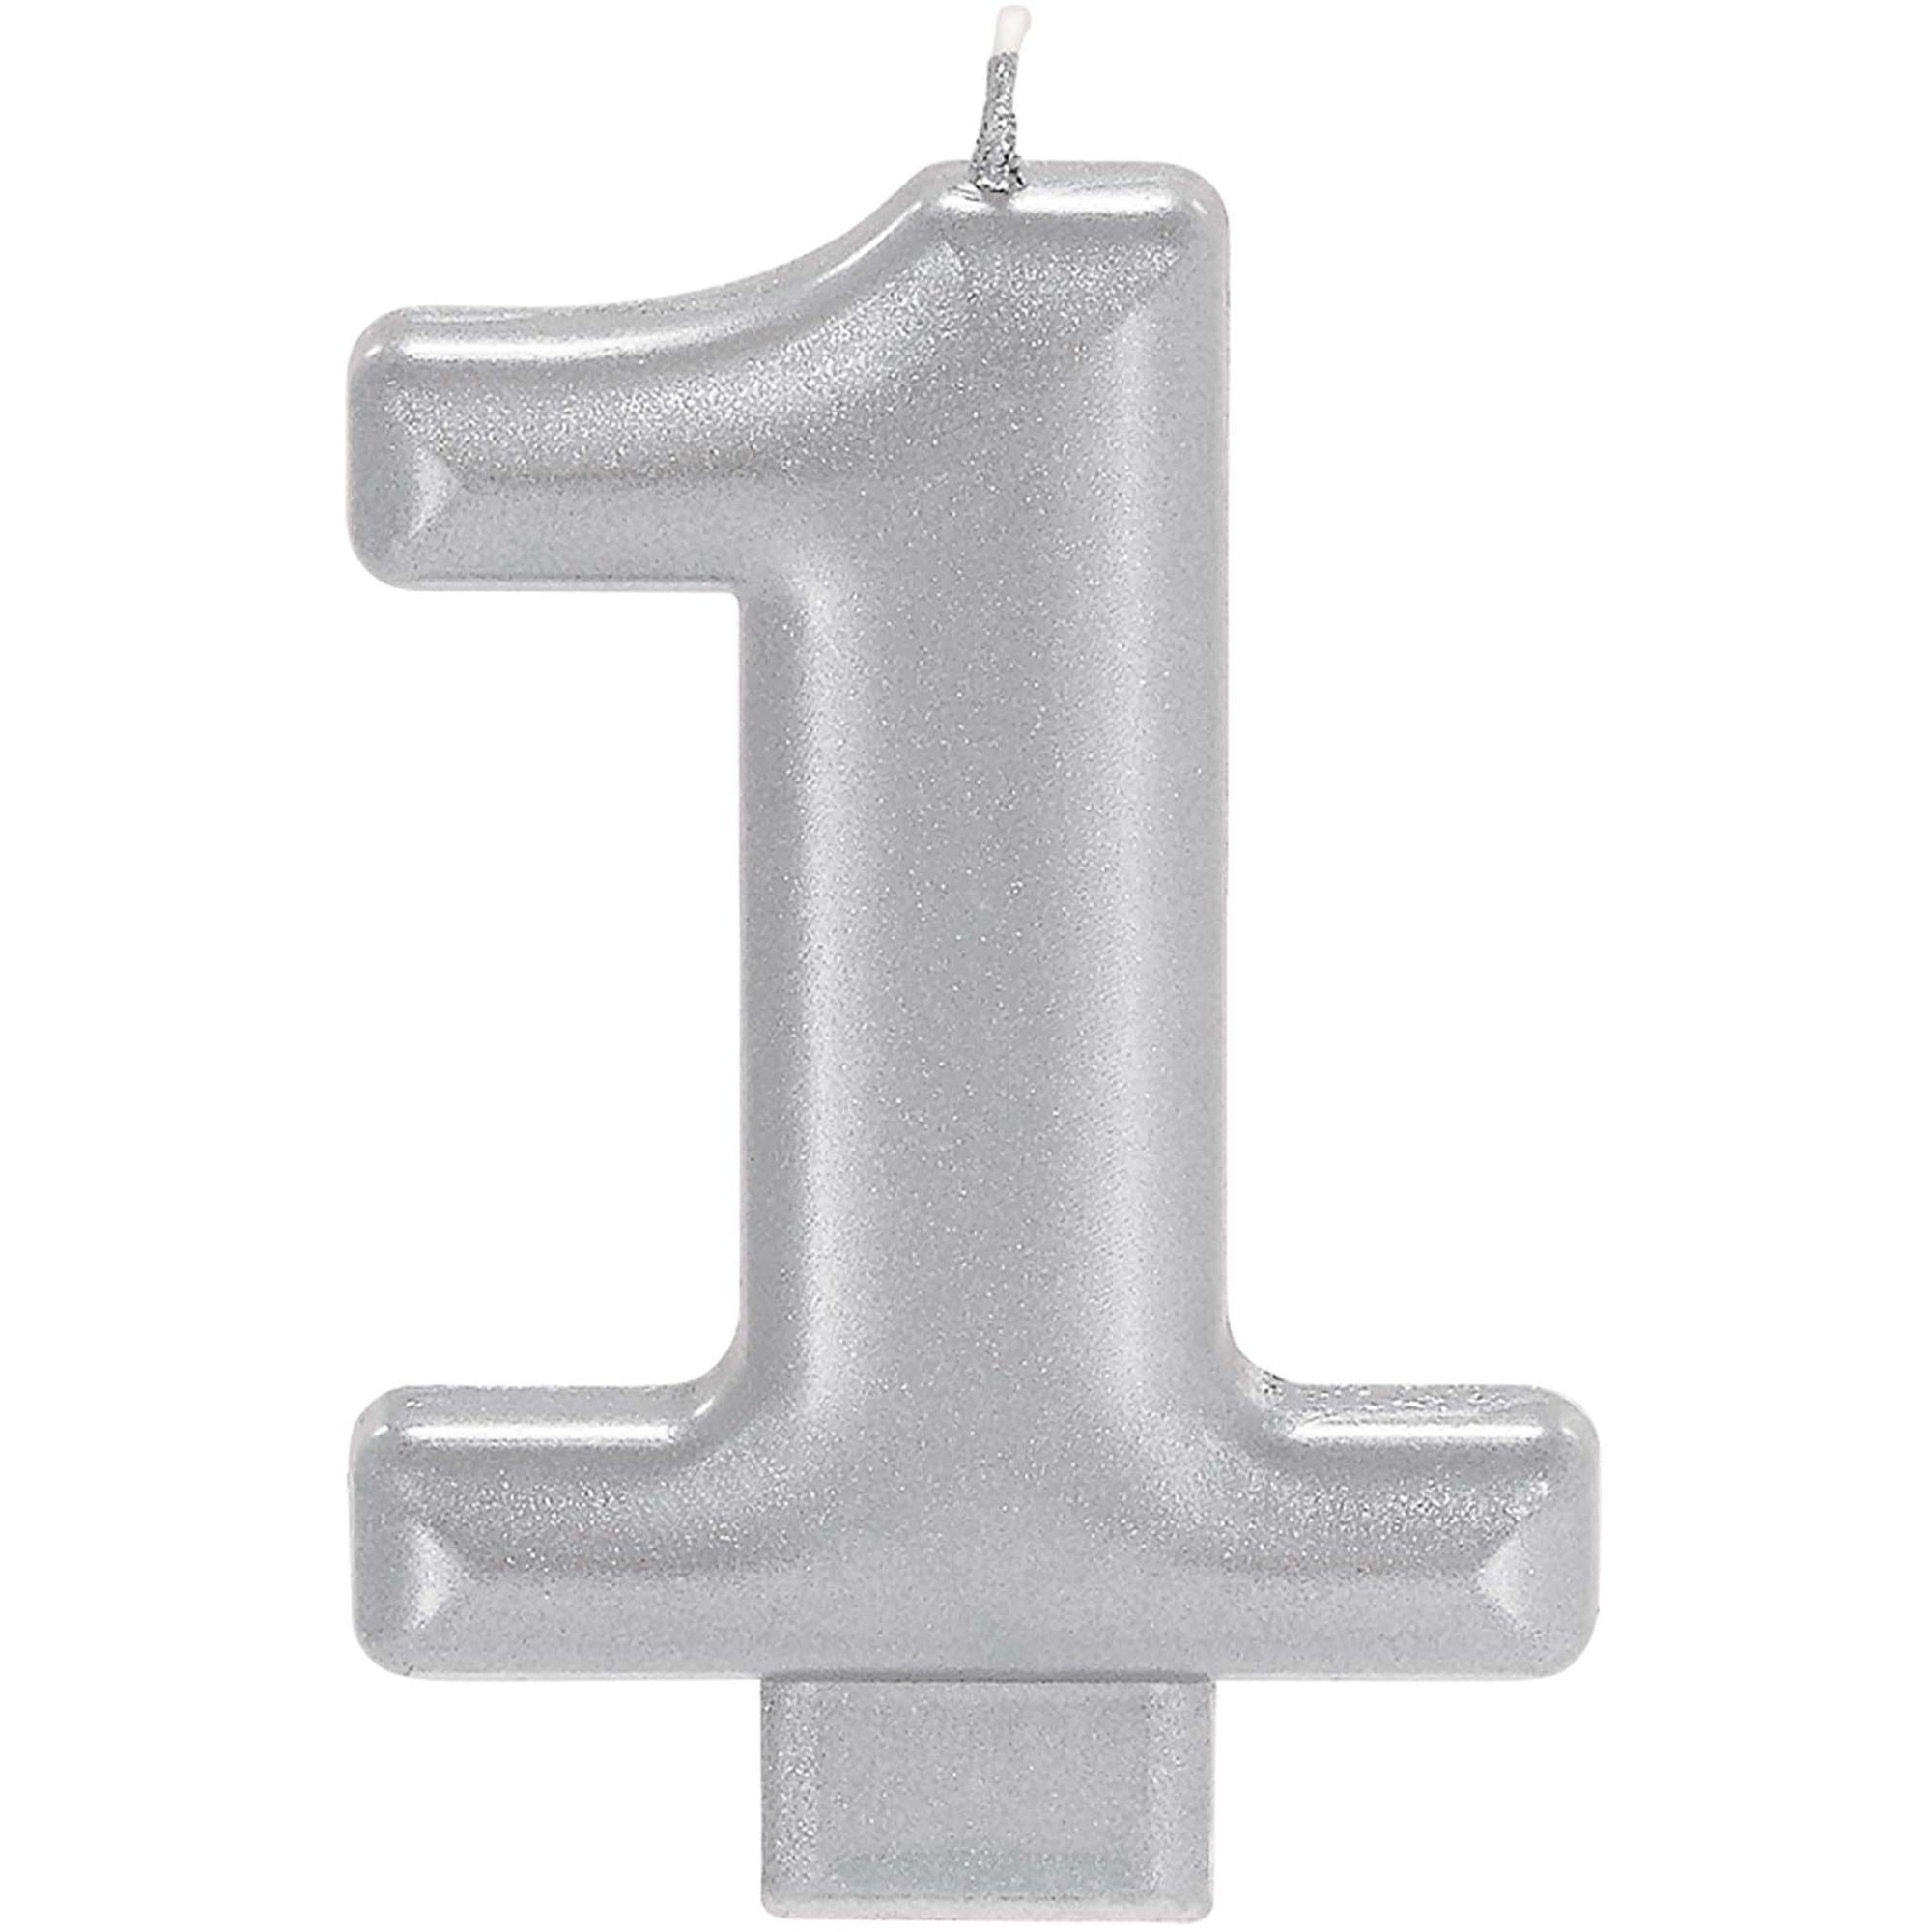 #1 Silver Numeral Metallic Candle Party Accessories - Party Centre